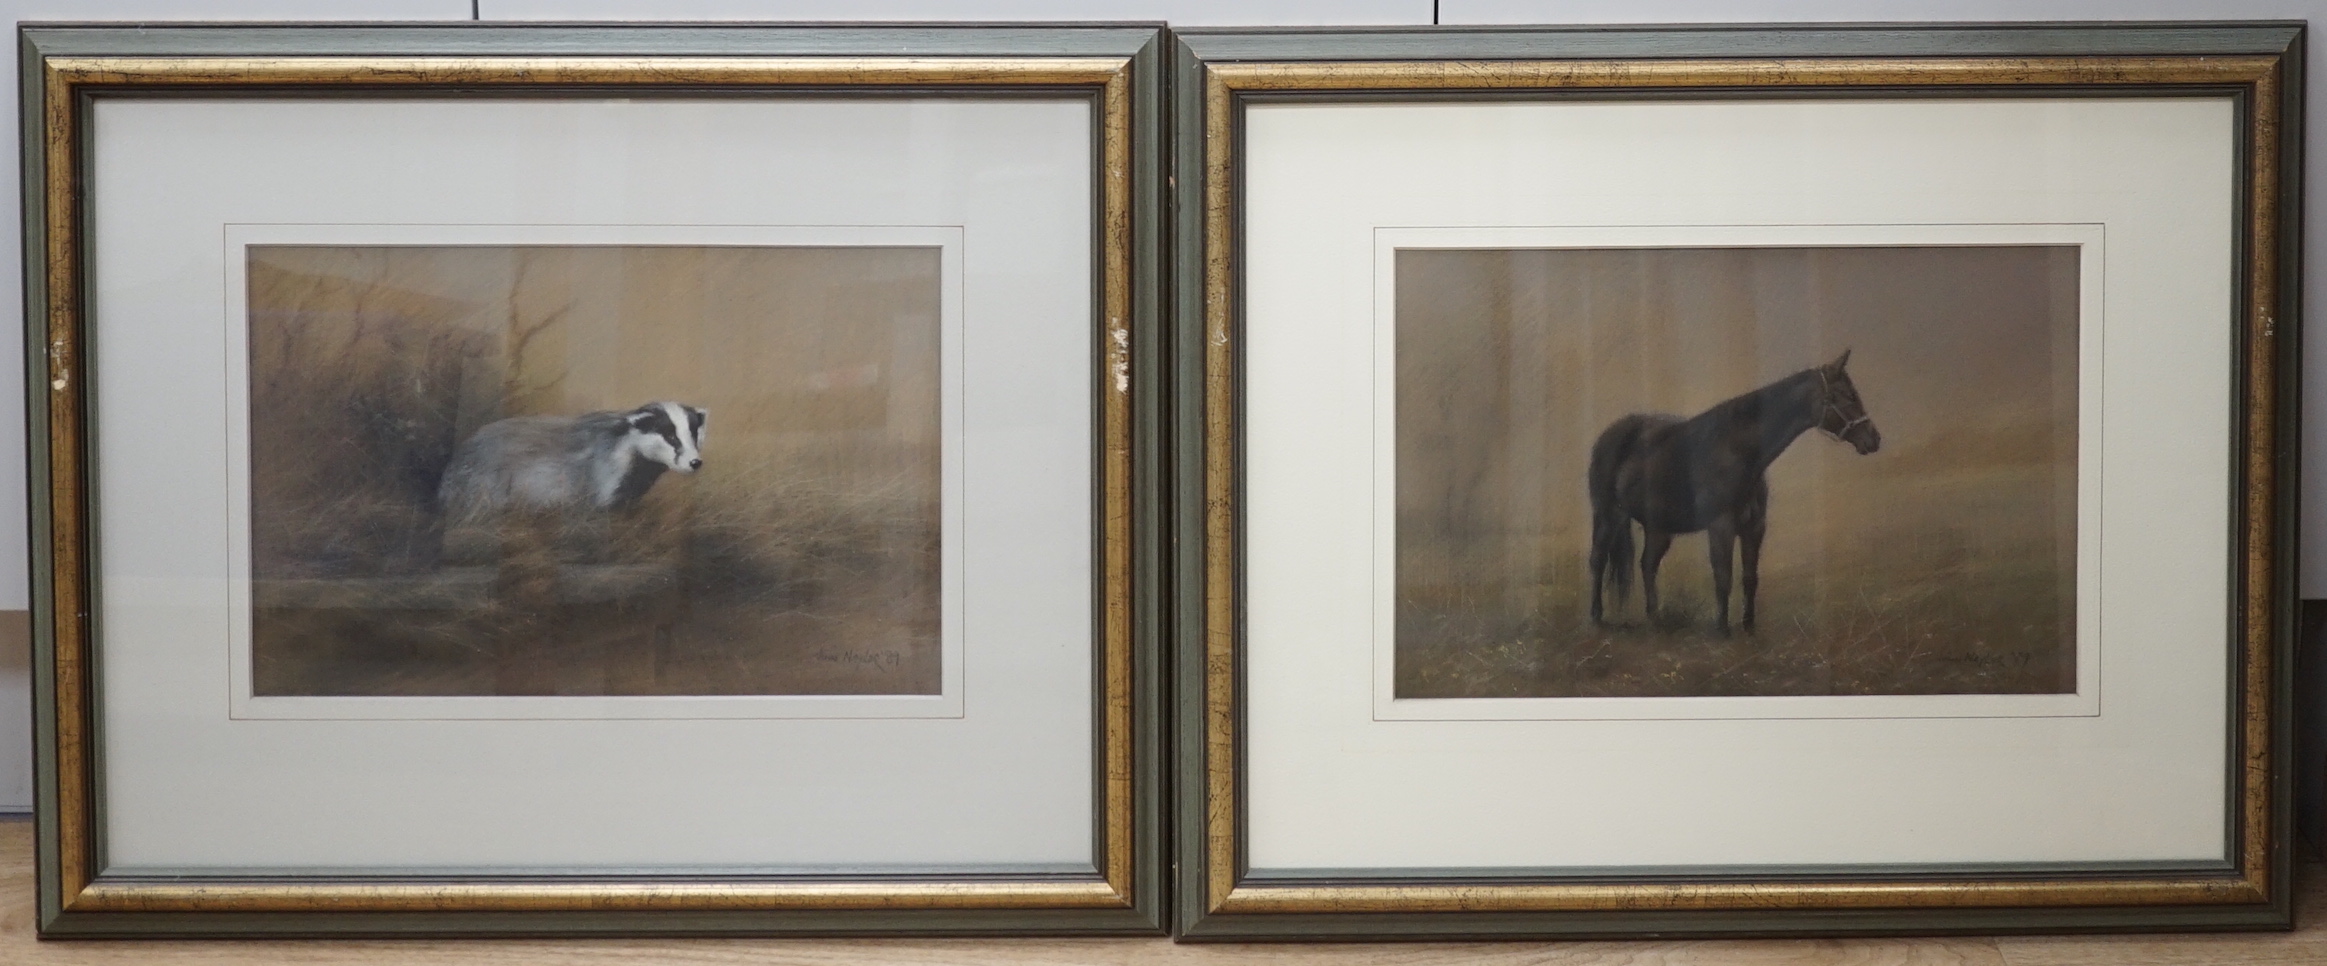 John Naylor (b.1960) pair of pastels, Studies of a badger and a horse, each signed and dated '89, 36 x 44cm                                                                                                                 